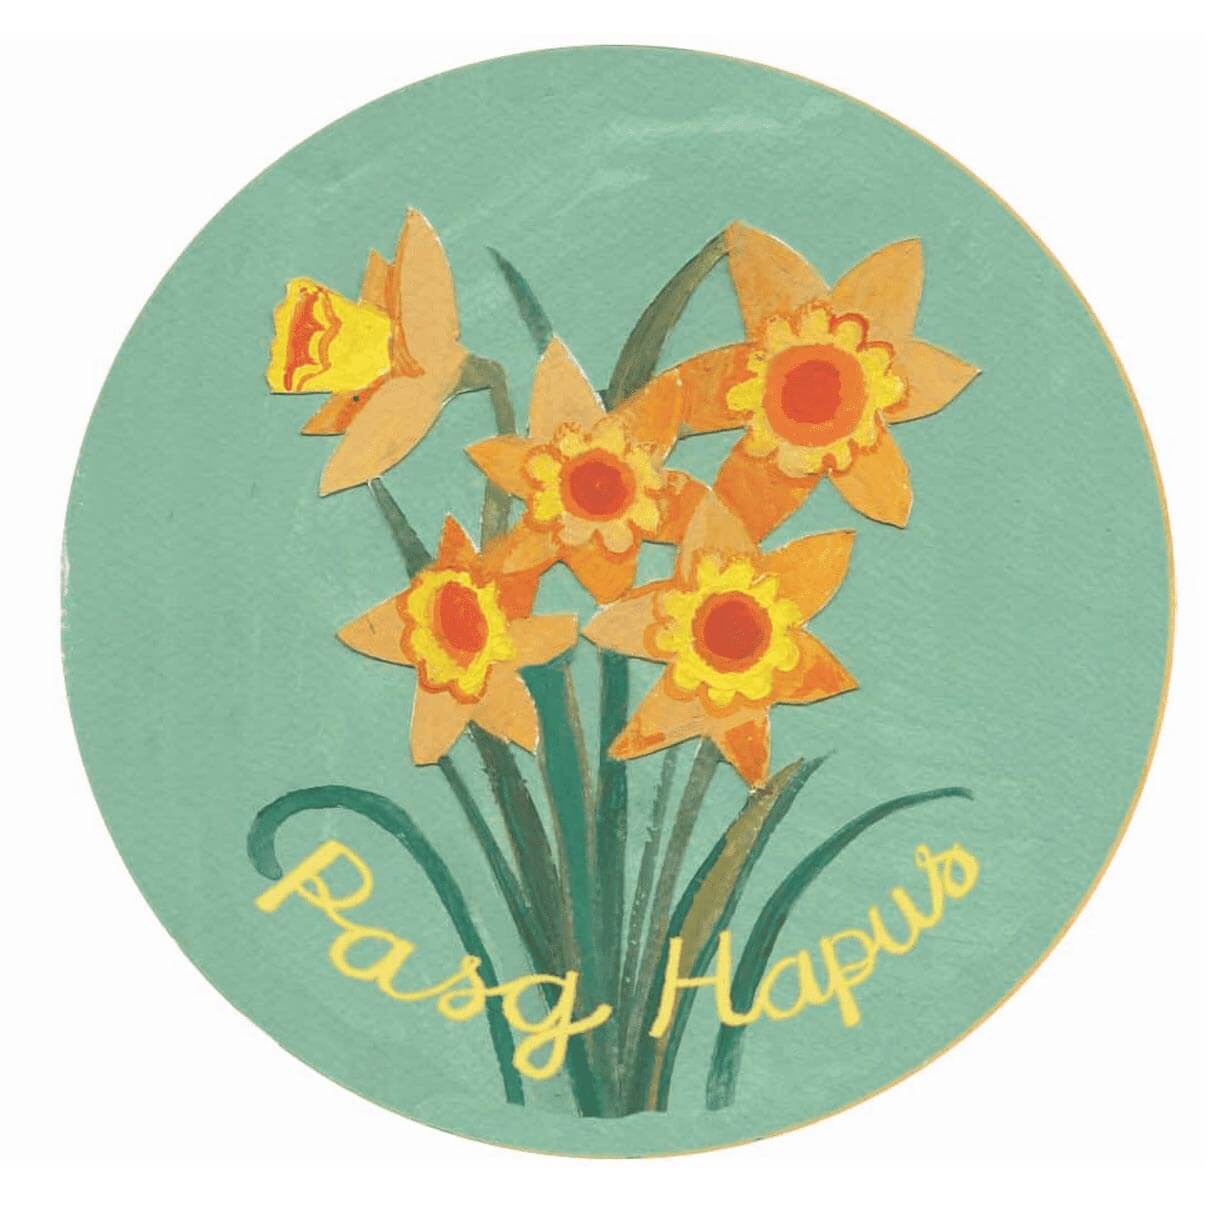 Decoration - Wooden - Pasg Hapus - Happy Easter - Daffodils